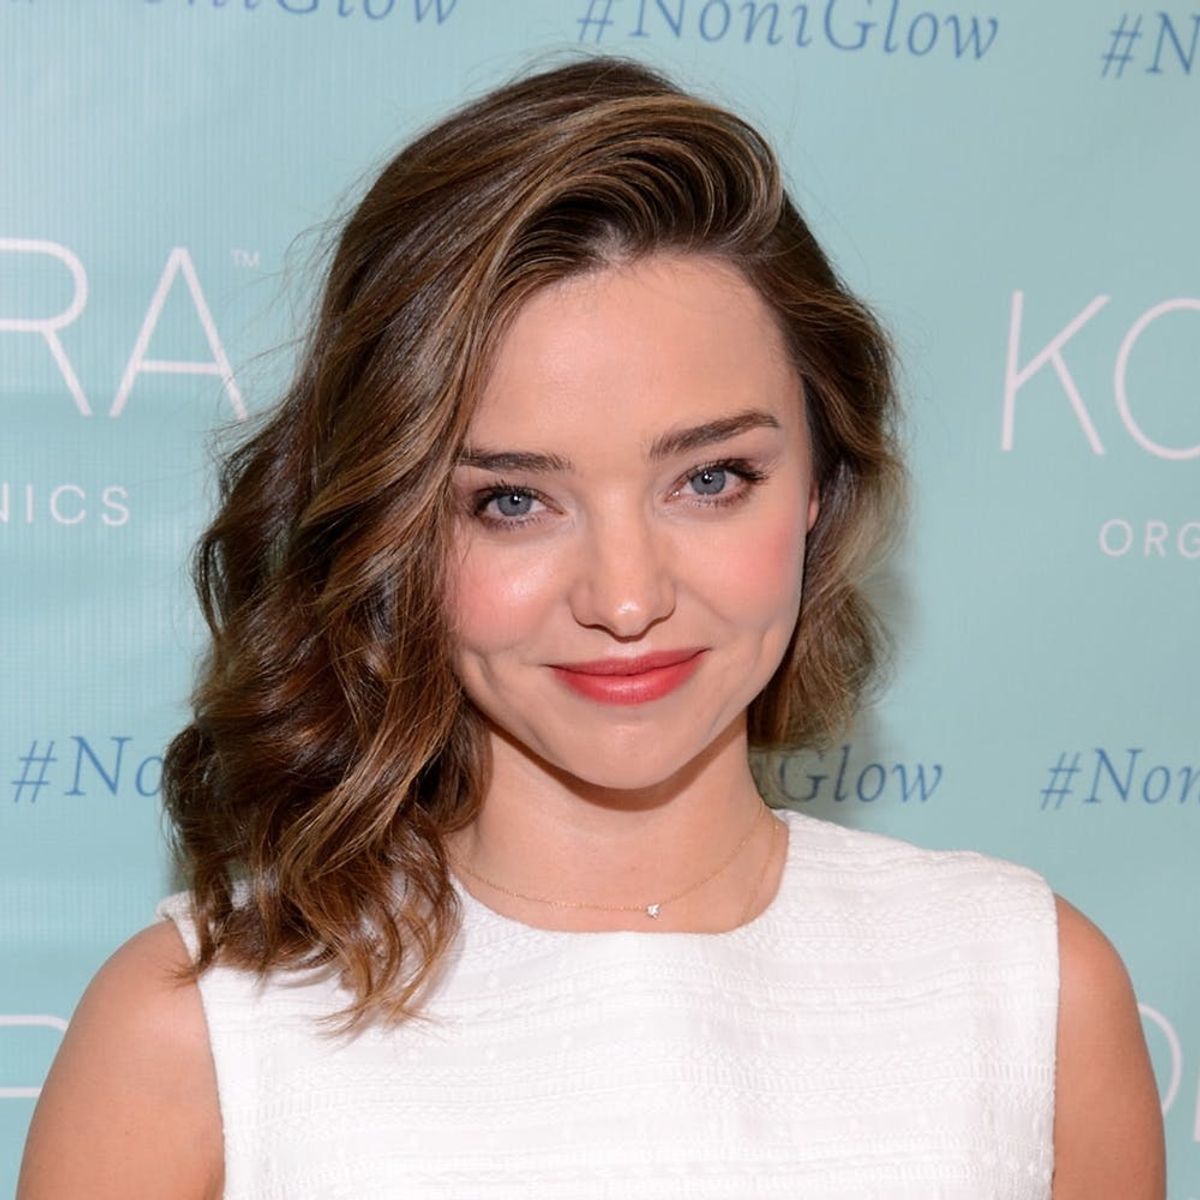 Miranda Kerr Has Finally Debuted Her Wedding Dress and It’s Every Bit As Gorgeous As We Could Have Hoped